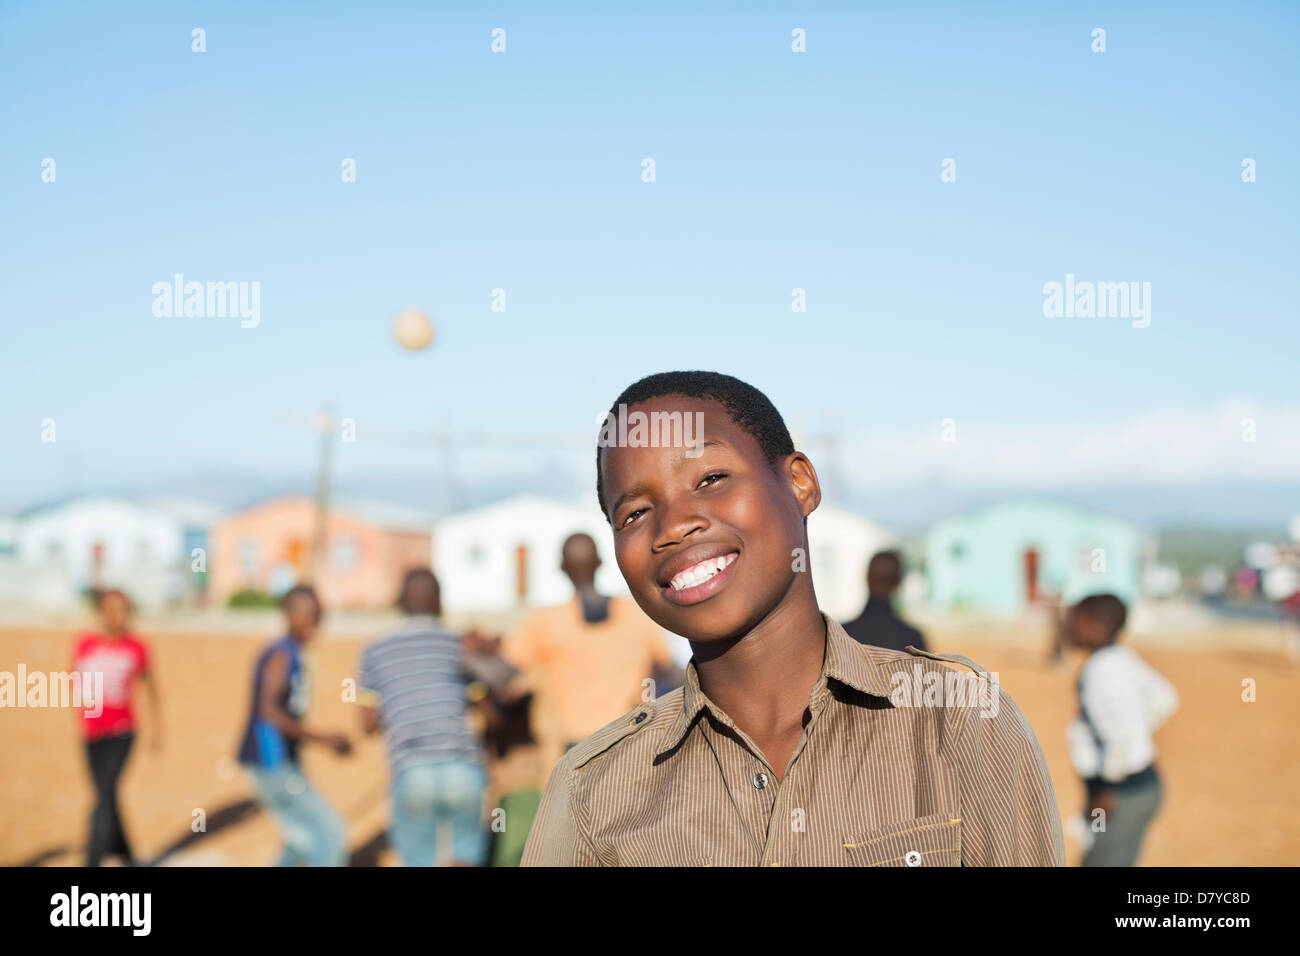 Boy smiling in dirt field Banque D'Images